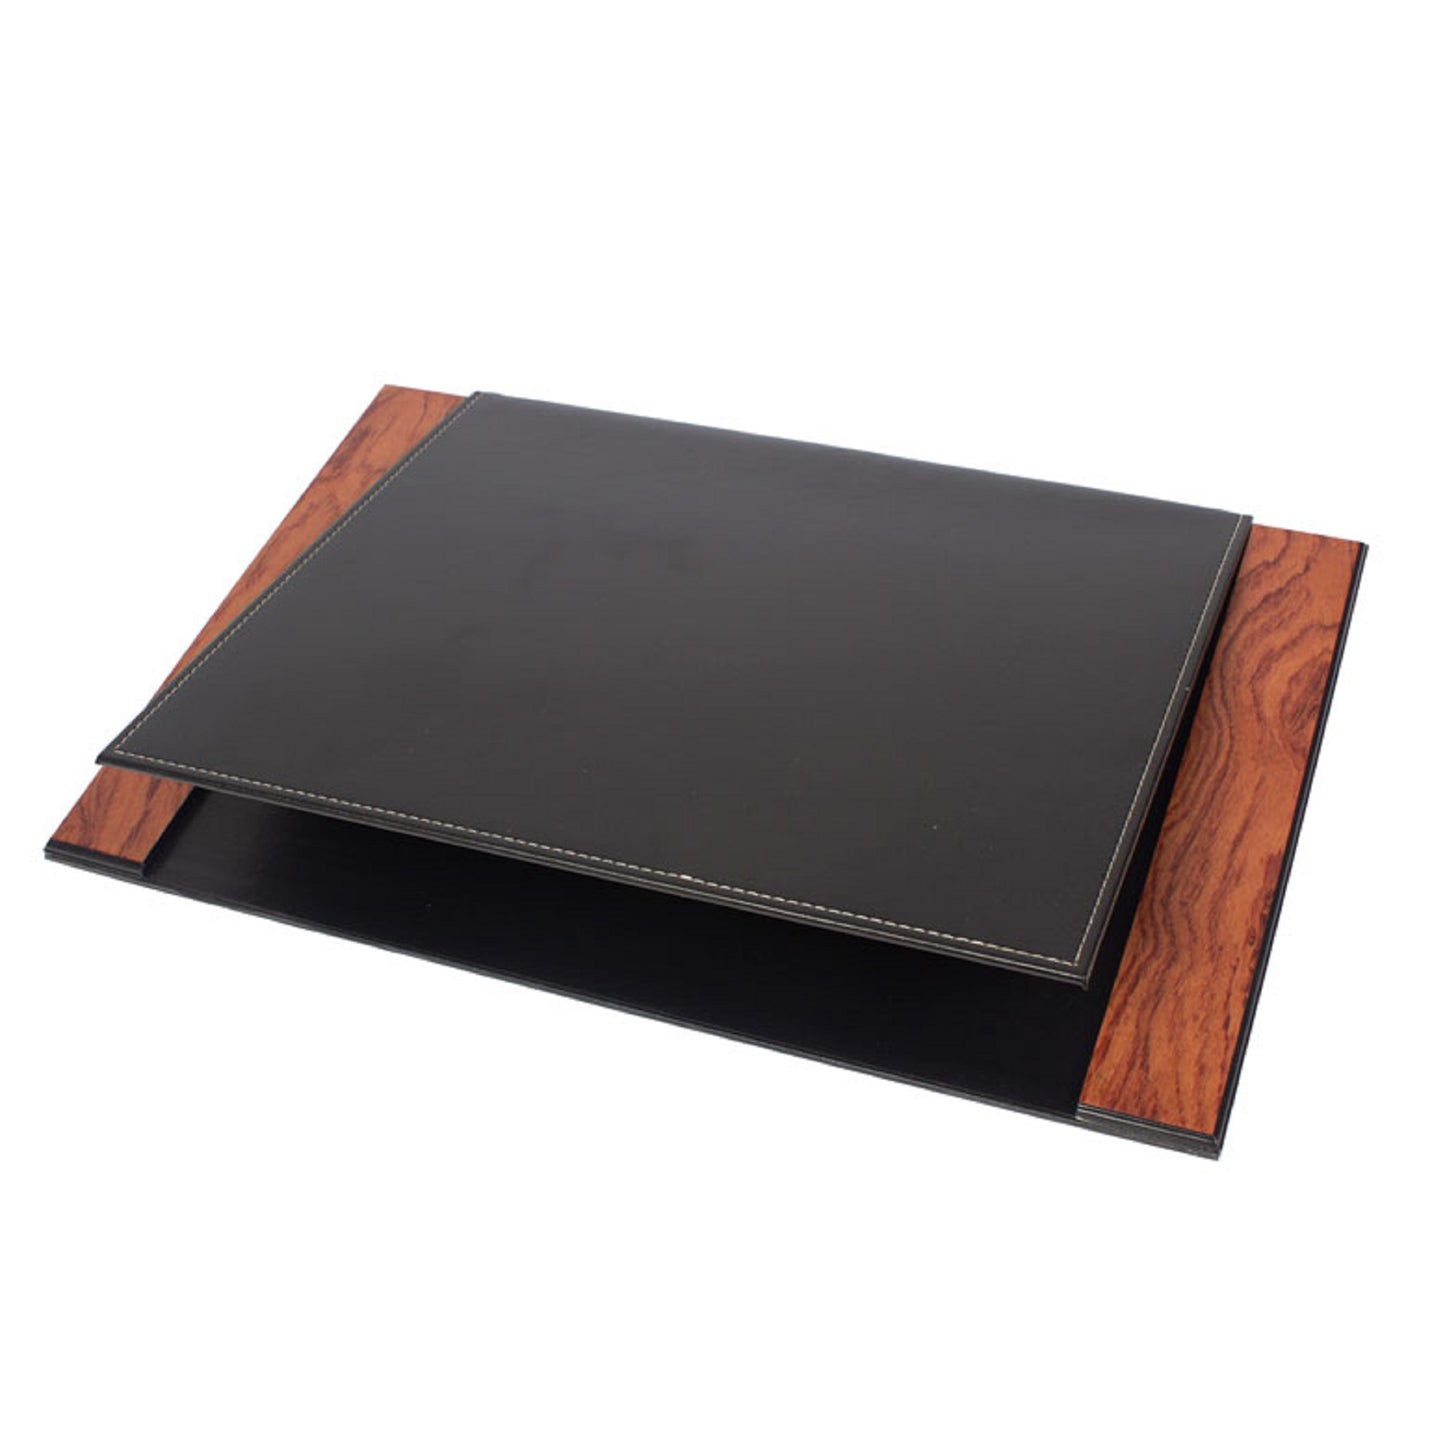 MOOG Leather Desk Pad | Prestige Desk Pad Mahogany Wood Combination | Desk Pad With Cover | Leather